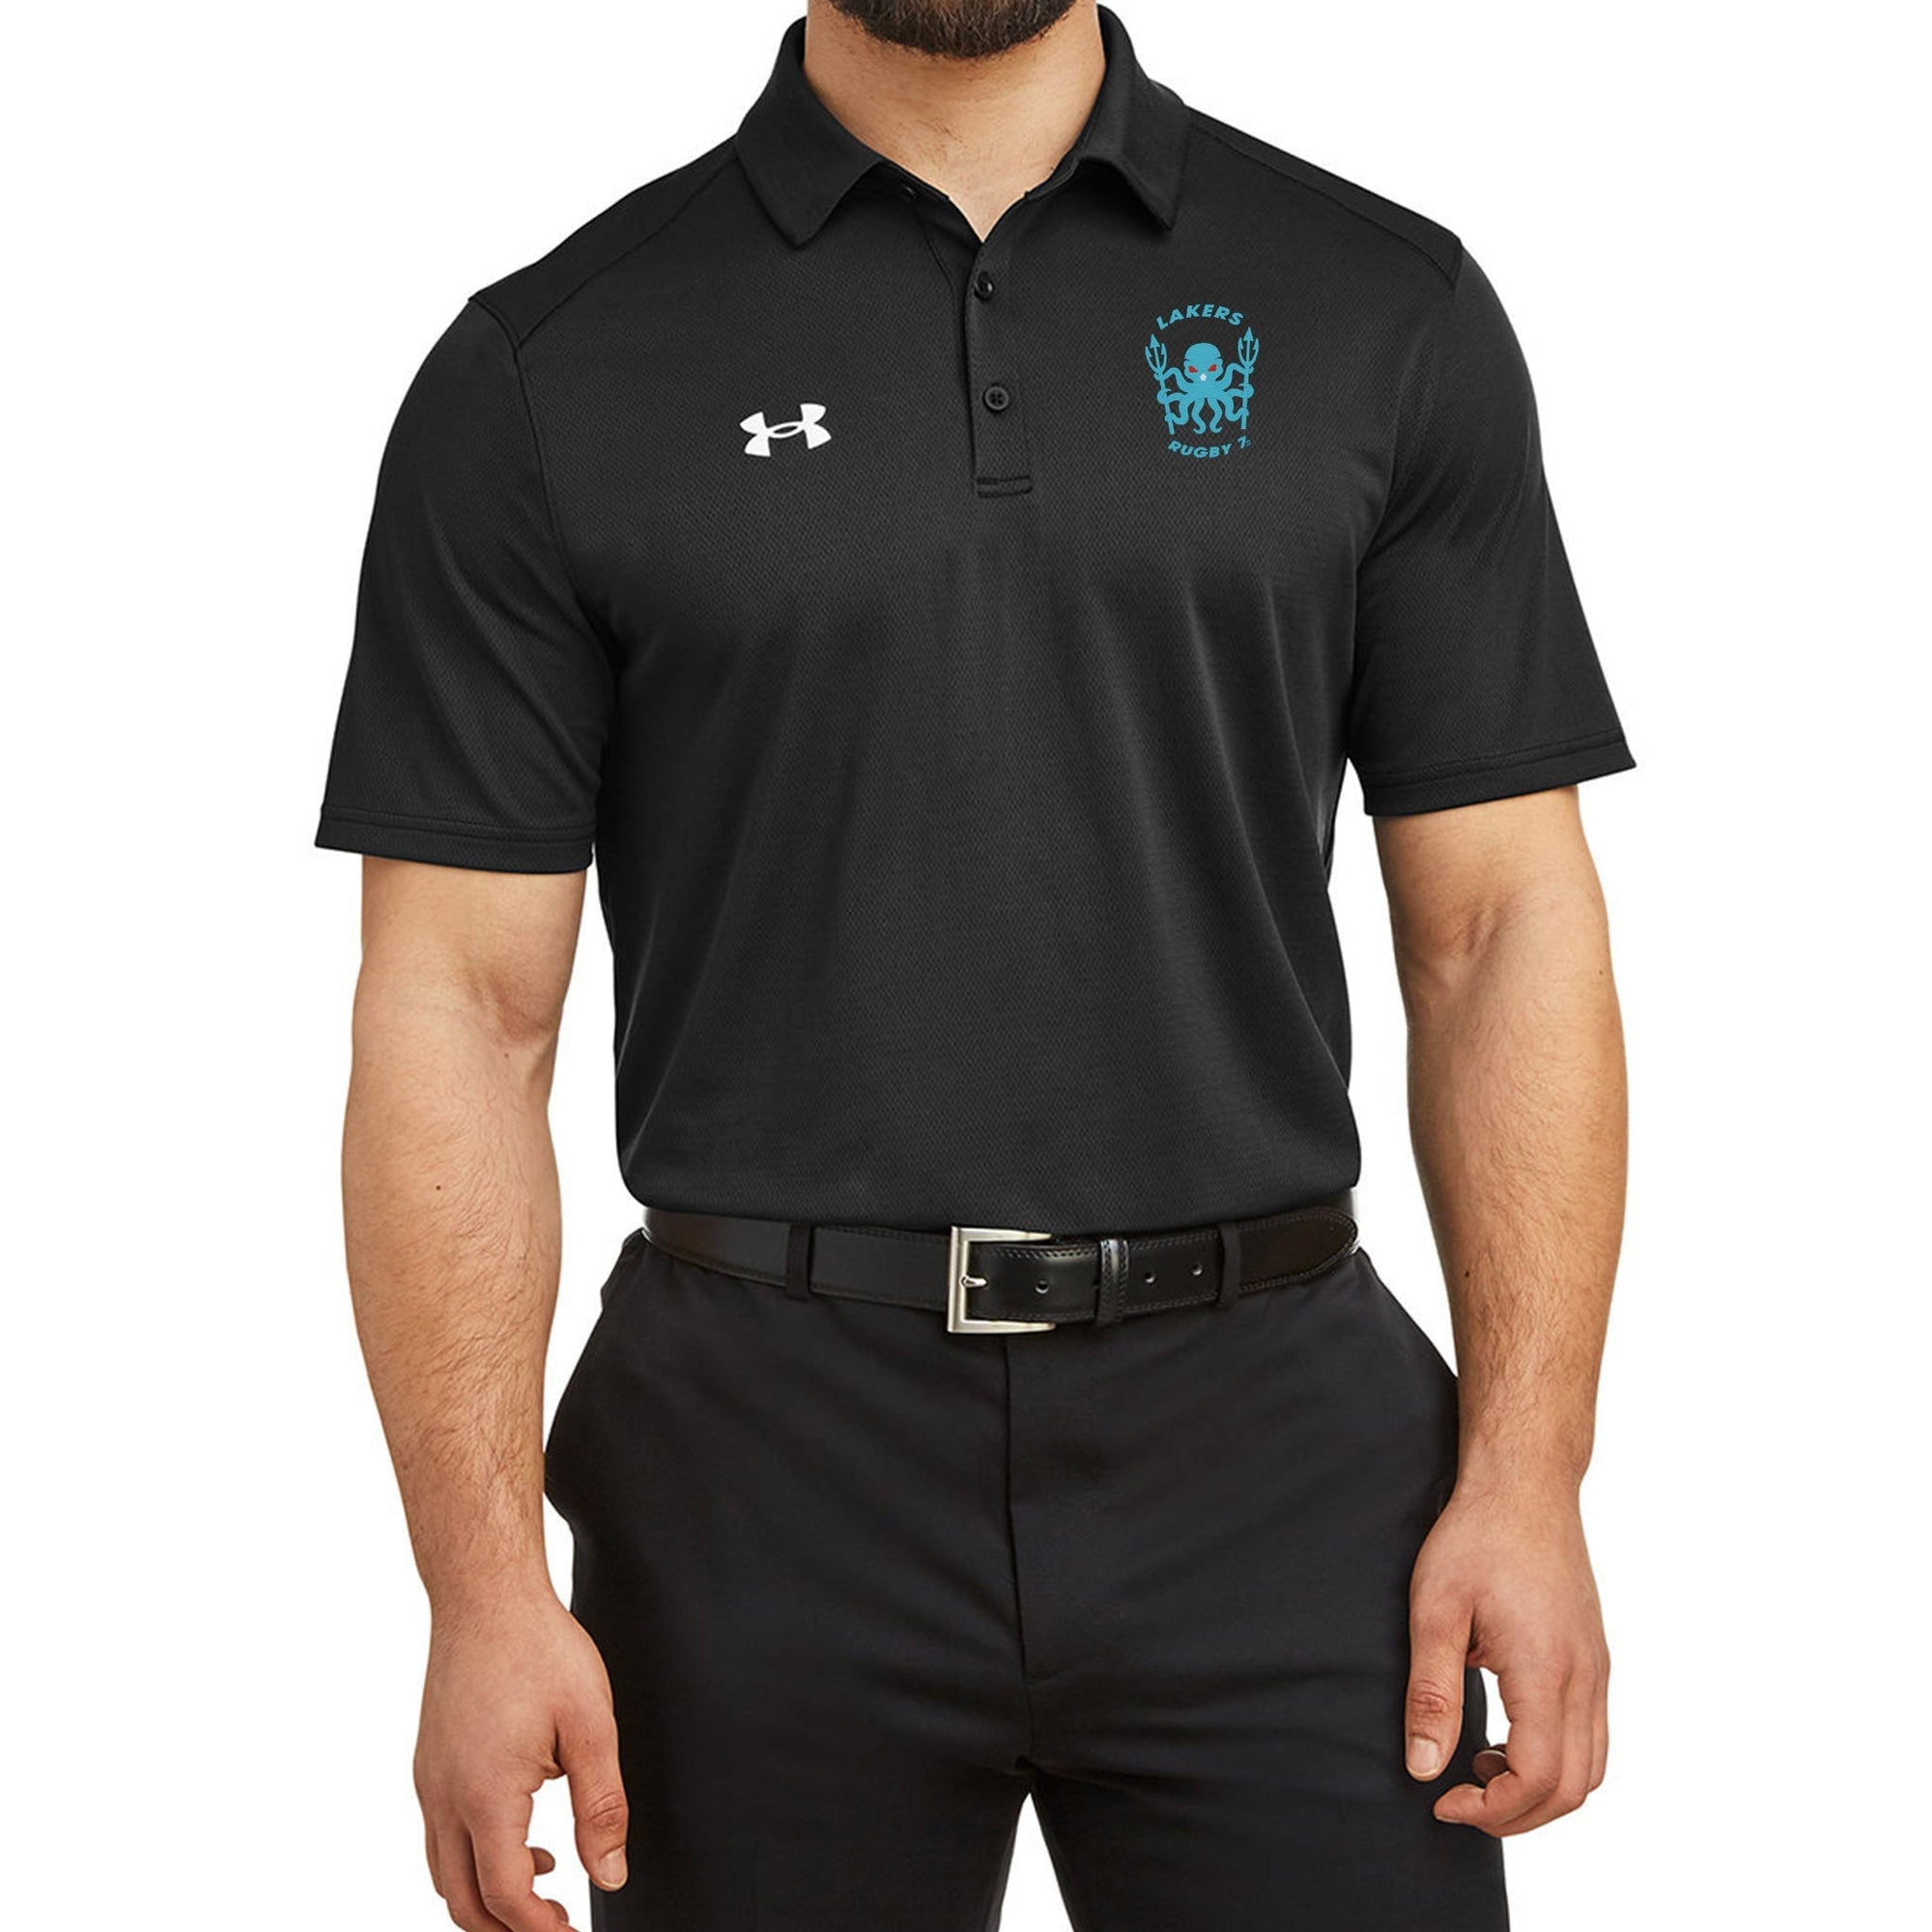 Rugby Imports Lakers Rugby 7s Tech Polo